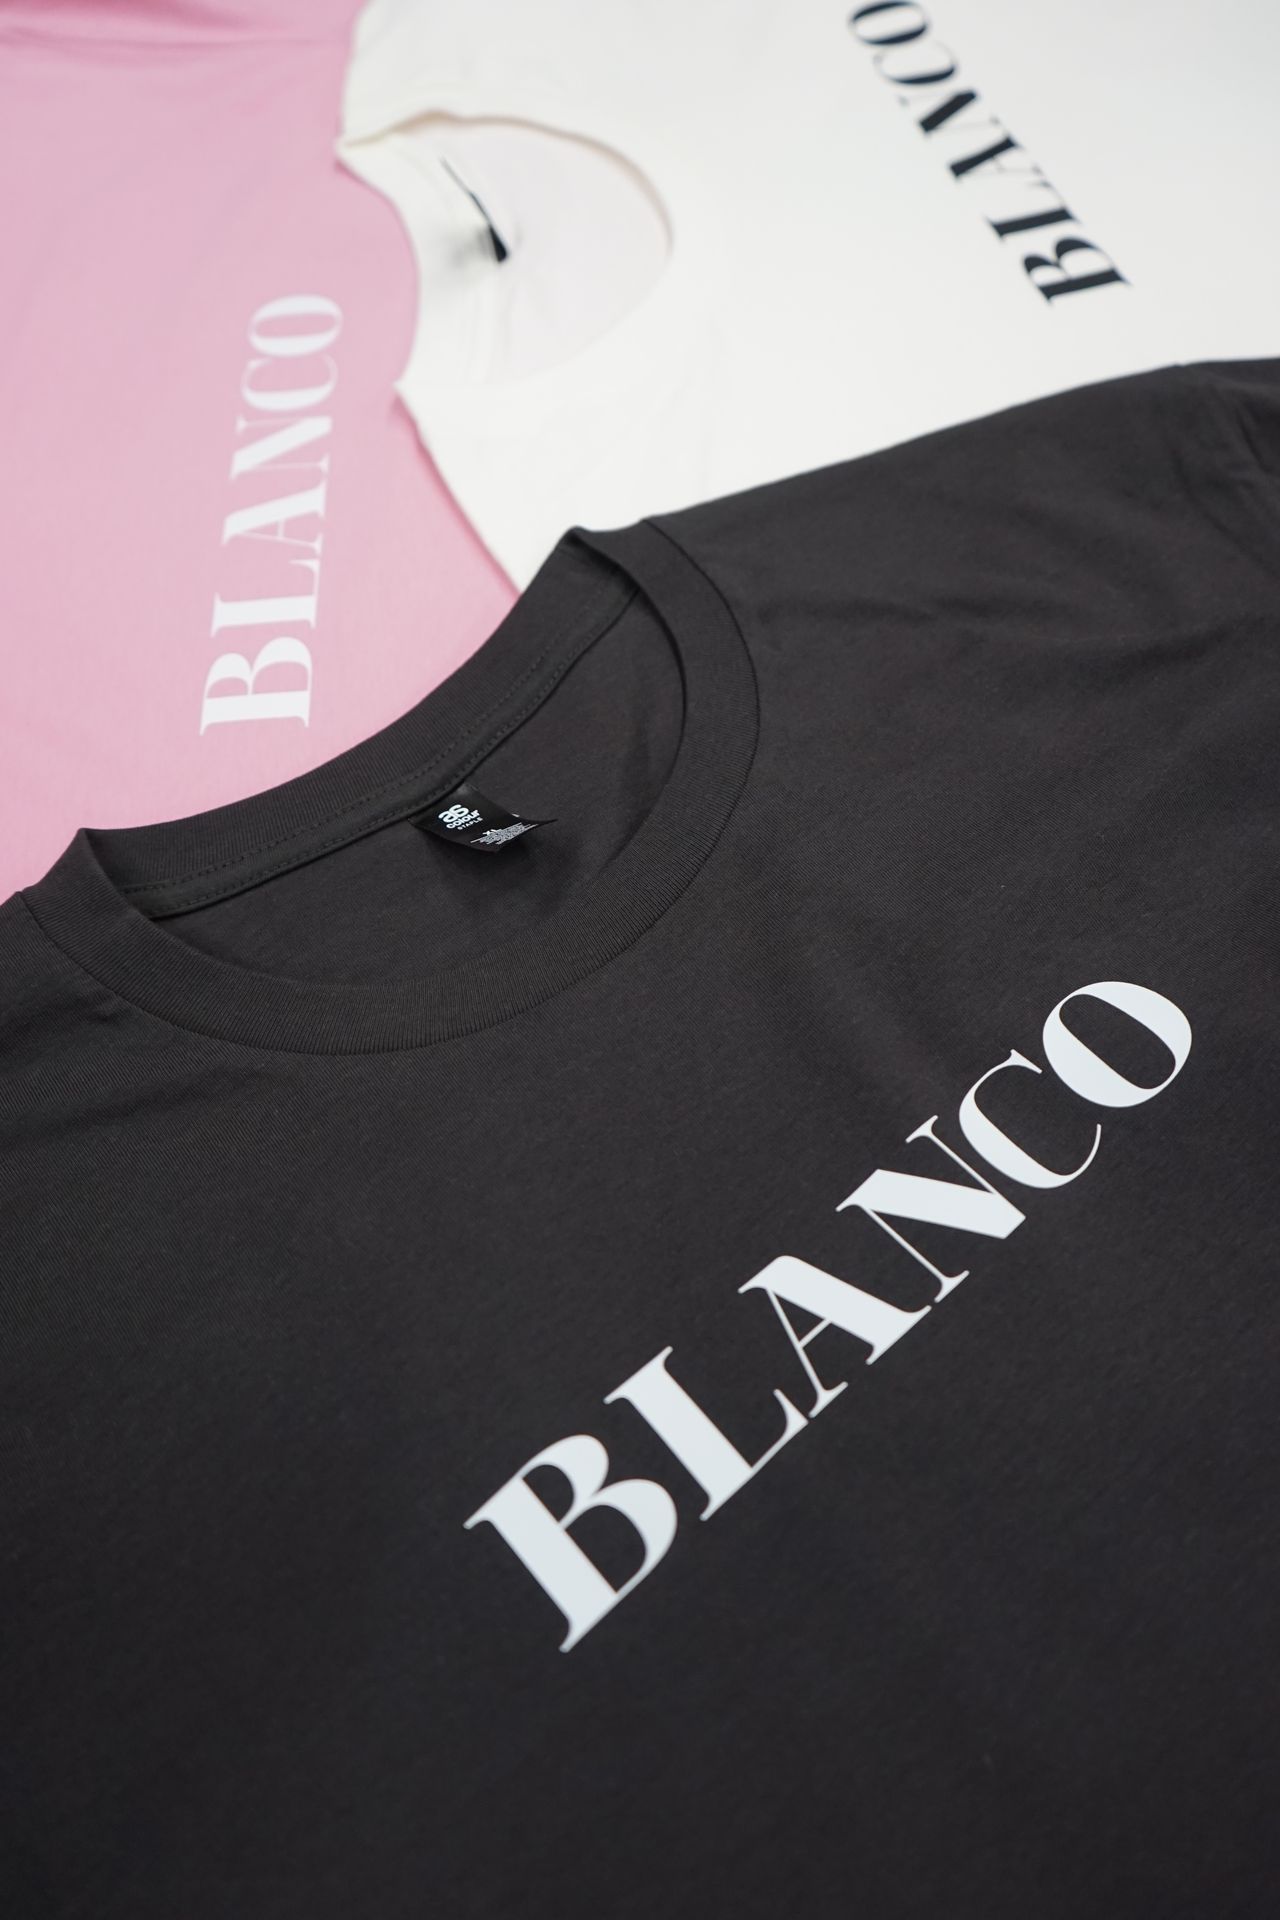 Elegant 'BLANCO' t-shirts in black and pink, featuring bold white lettering for a striking contrast. This minimalist design captures the essence of the brand, combining simplicity with a strong visual impact